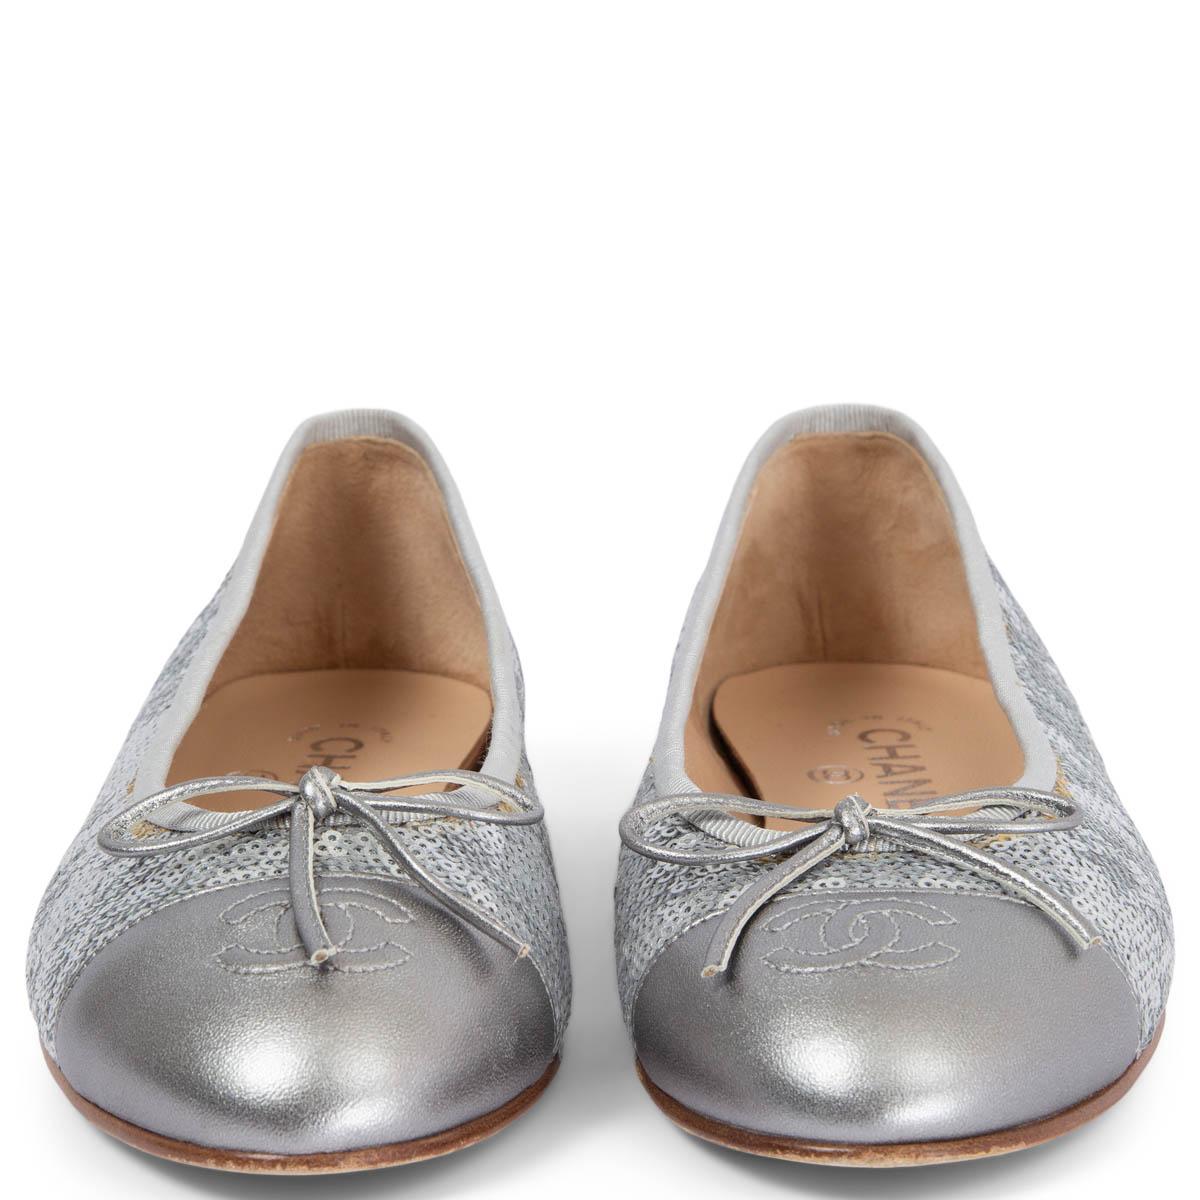 Chanel Ballerinas Flats Size 38 -2 For Sale on 1stDibs | chanel ballet flats  with ankle chain, silver chanel flats, chanel flats with ankle chain